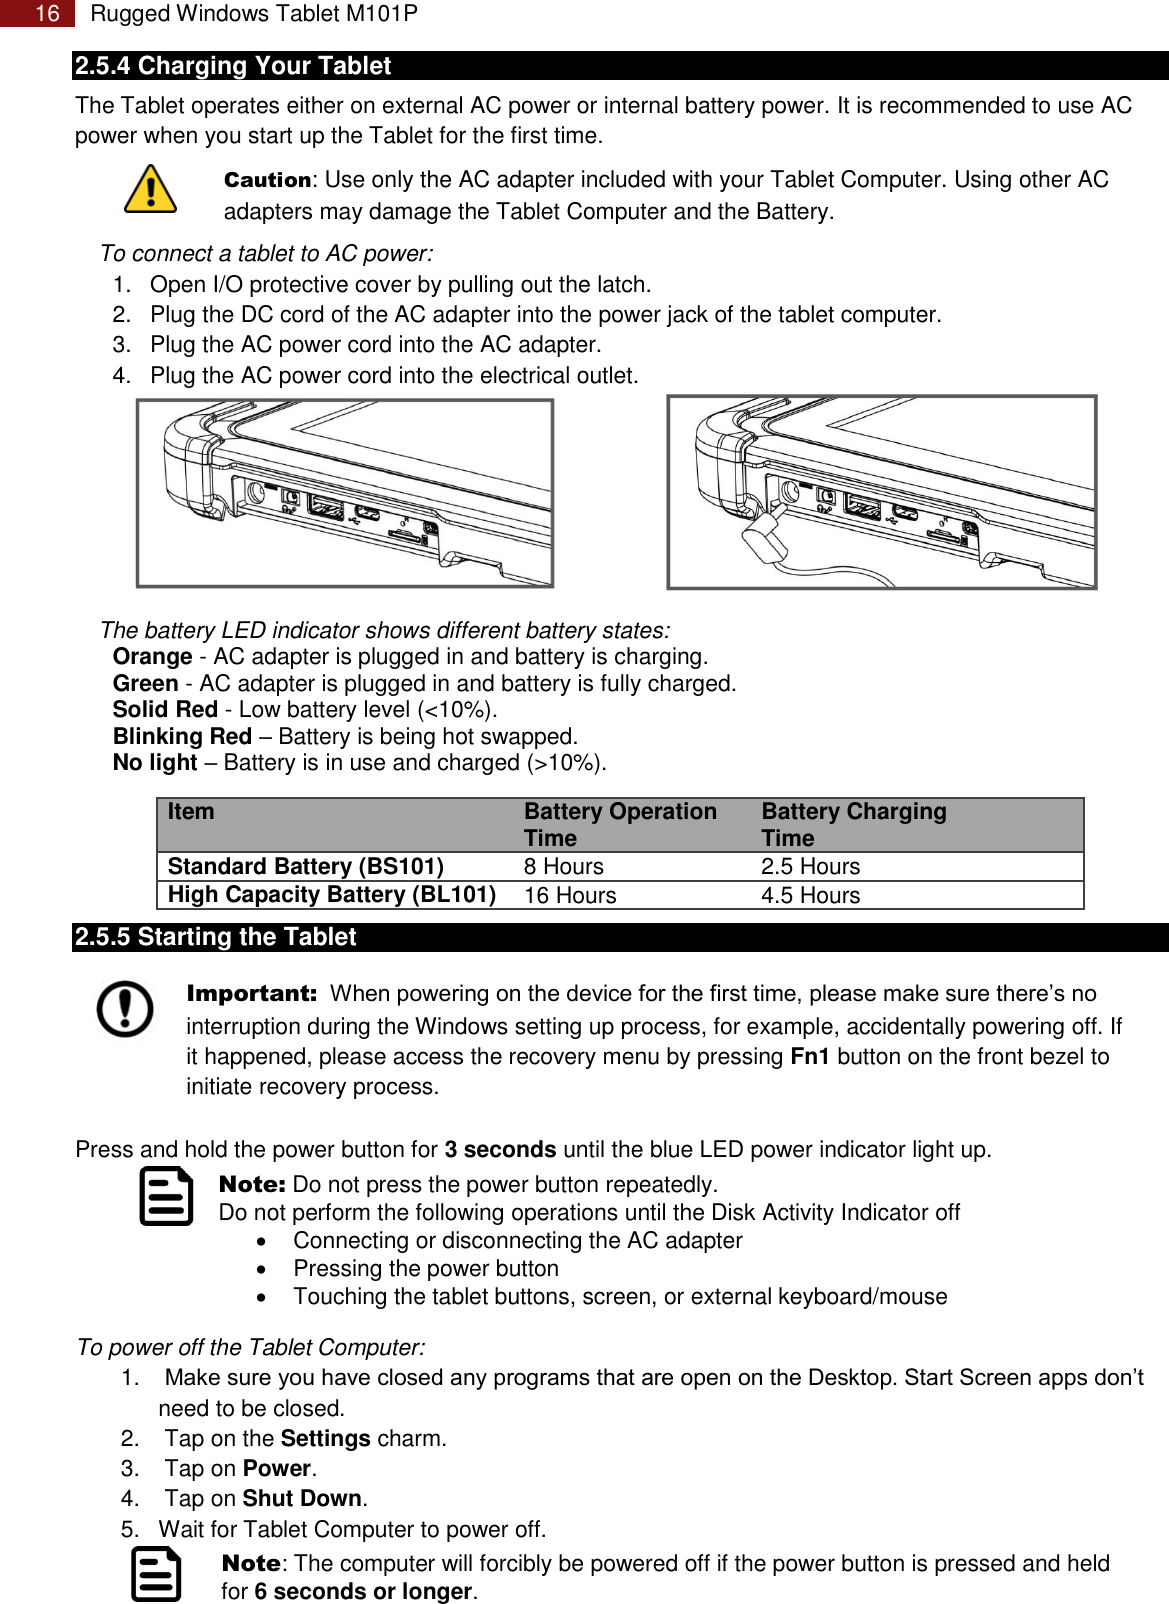 Page 16 of Winmate M101P Rugged Tablet PC User Manual Rugged Windows Tablet M101P